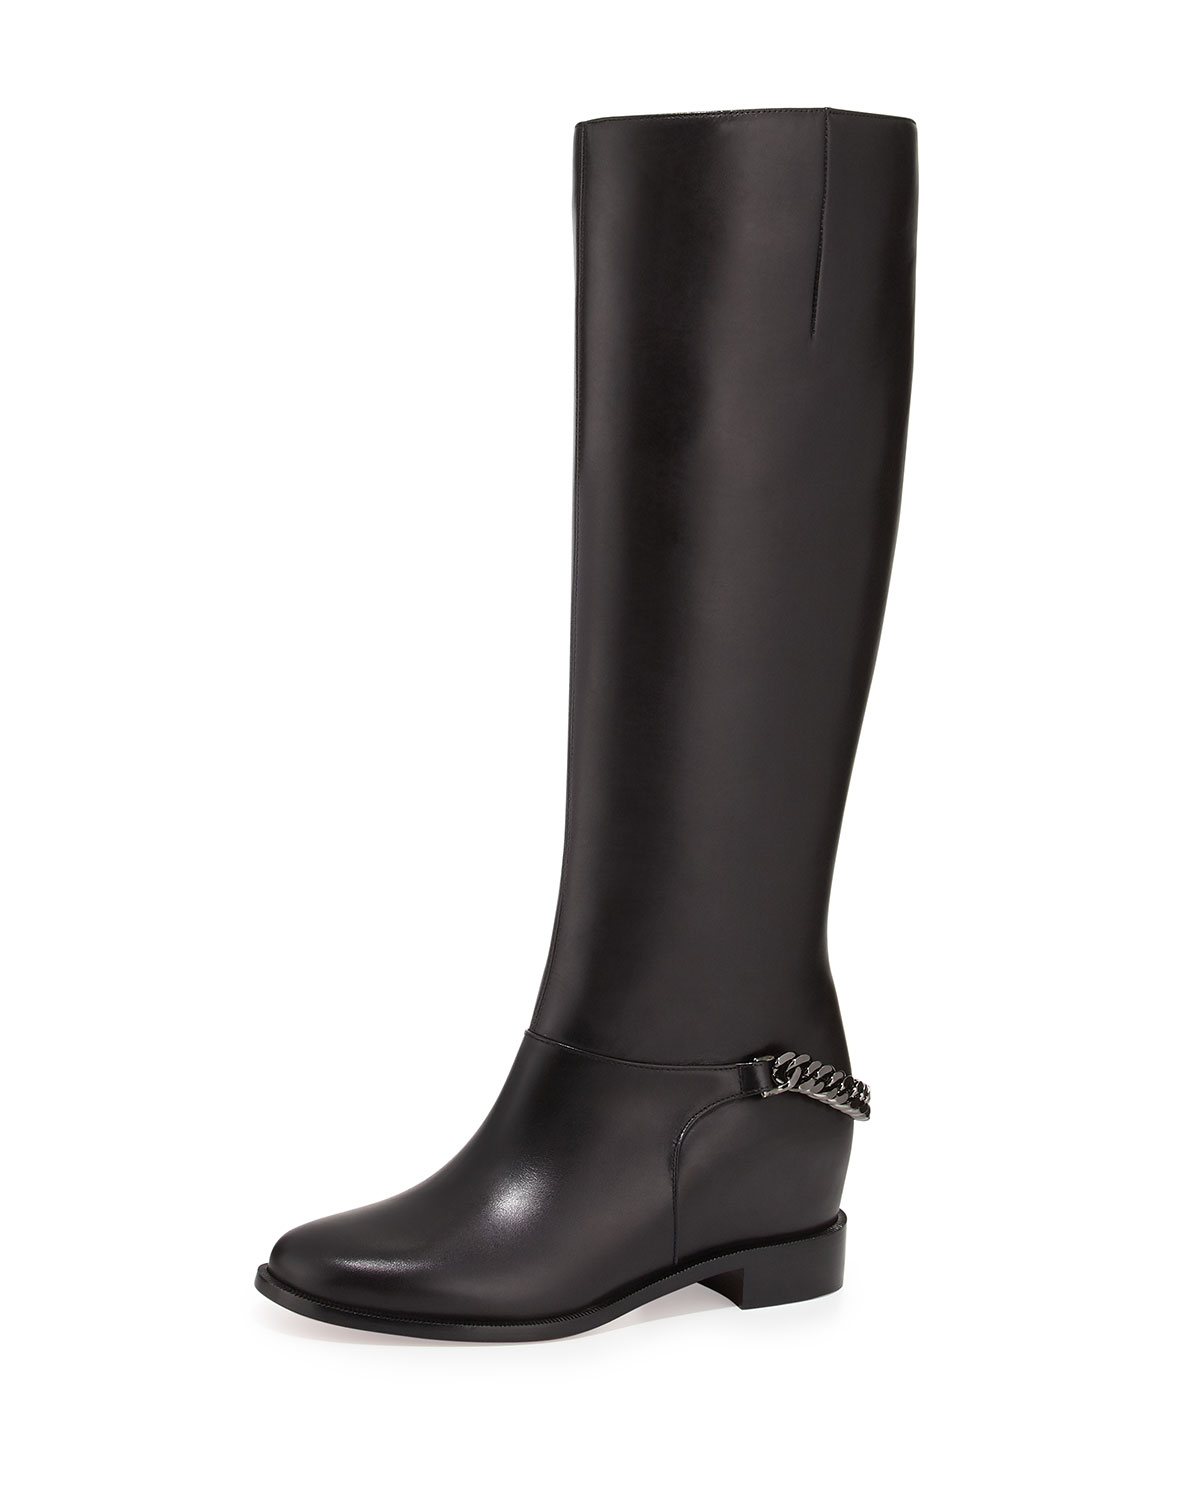 Artesur » christian louboutin Cate knee-high boots Black leather round toes